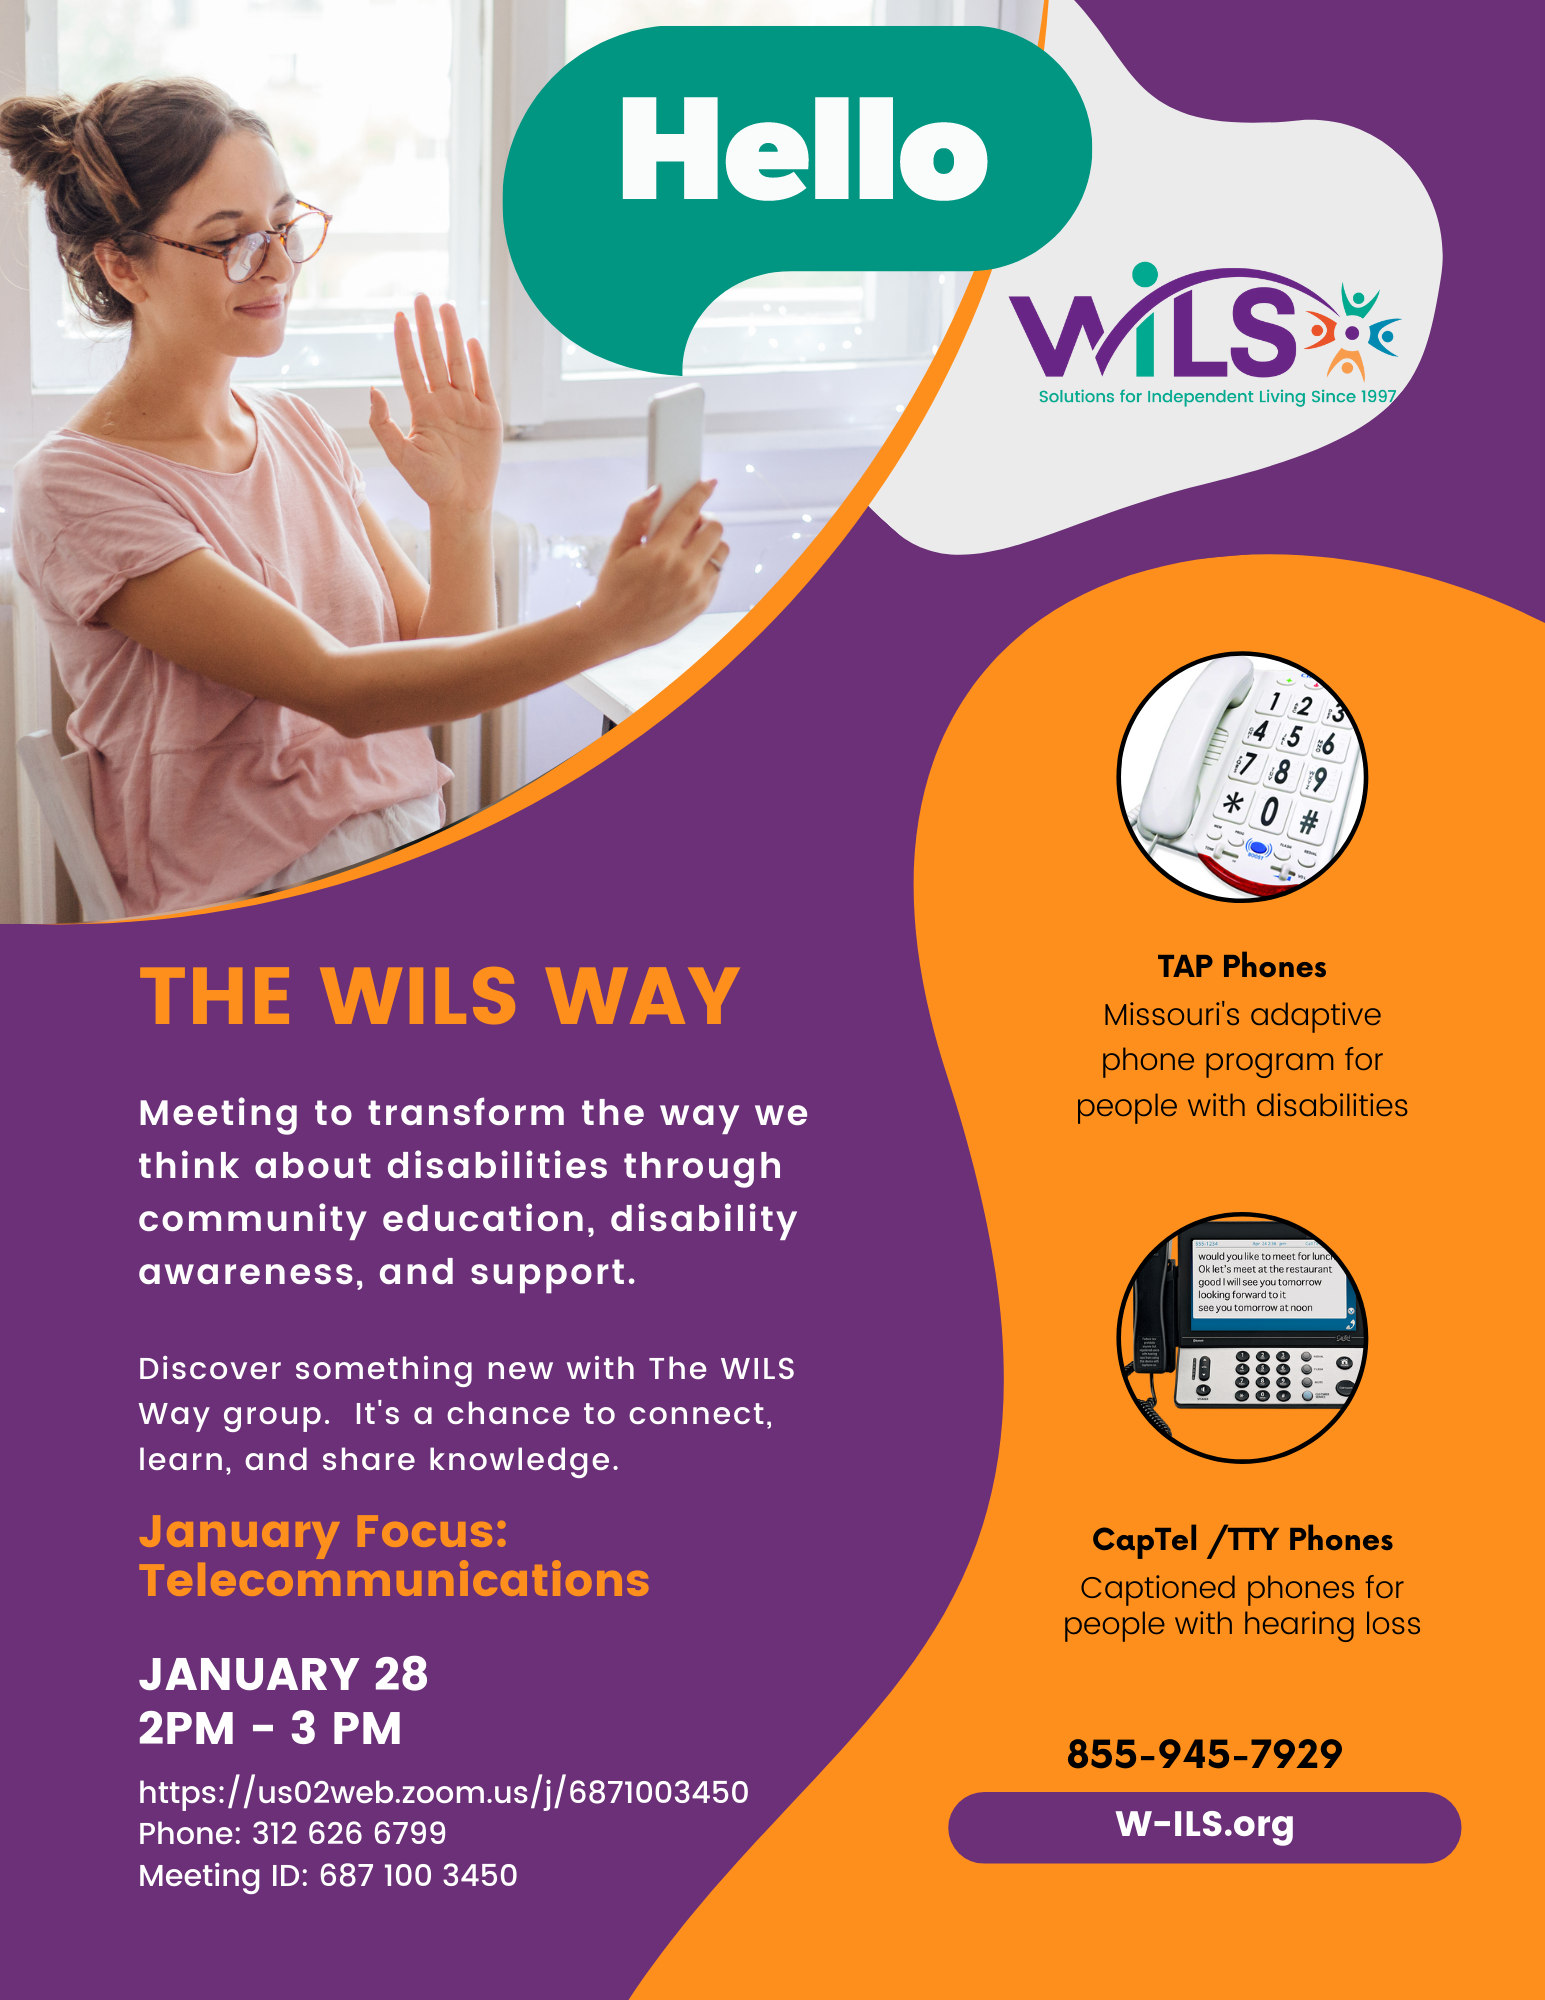 The WILS Way: Meeting to transform the way we think about disabilities through community education, disability awareness, and support.  Discover something new with The WILS Way group. It's a chance to connect, learn, and share knowledge.  January Focus:  Telecommunications  Join with Zoom at: https://us02web.zoom.us/j/6871003450  Join by phone: 312-626-6799 with meeting ID: 687 100 3450